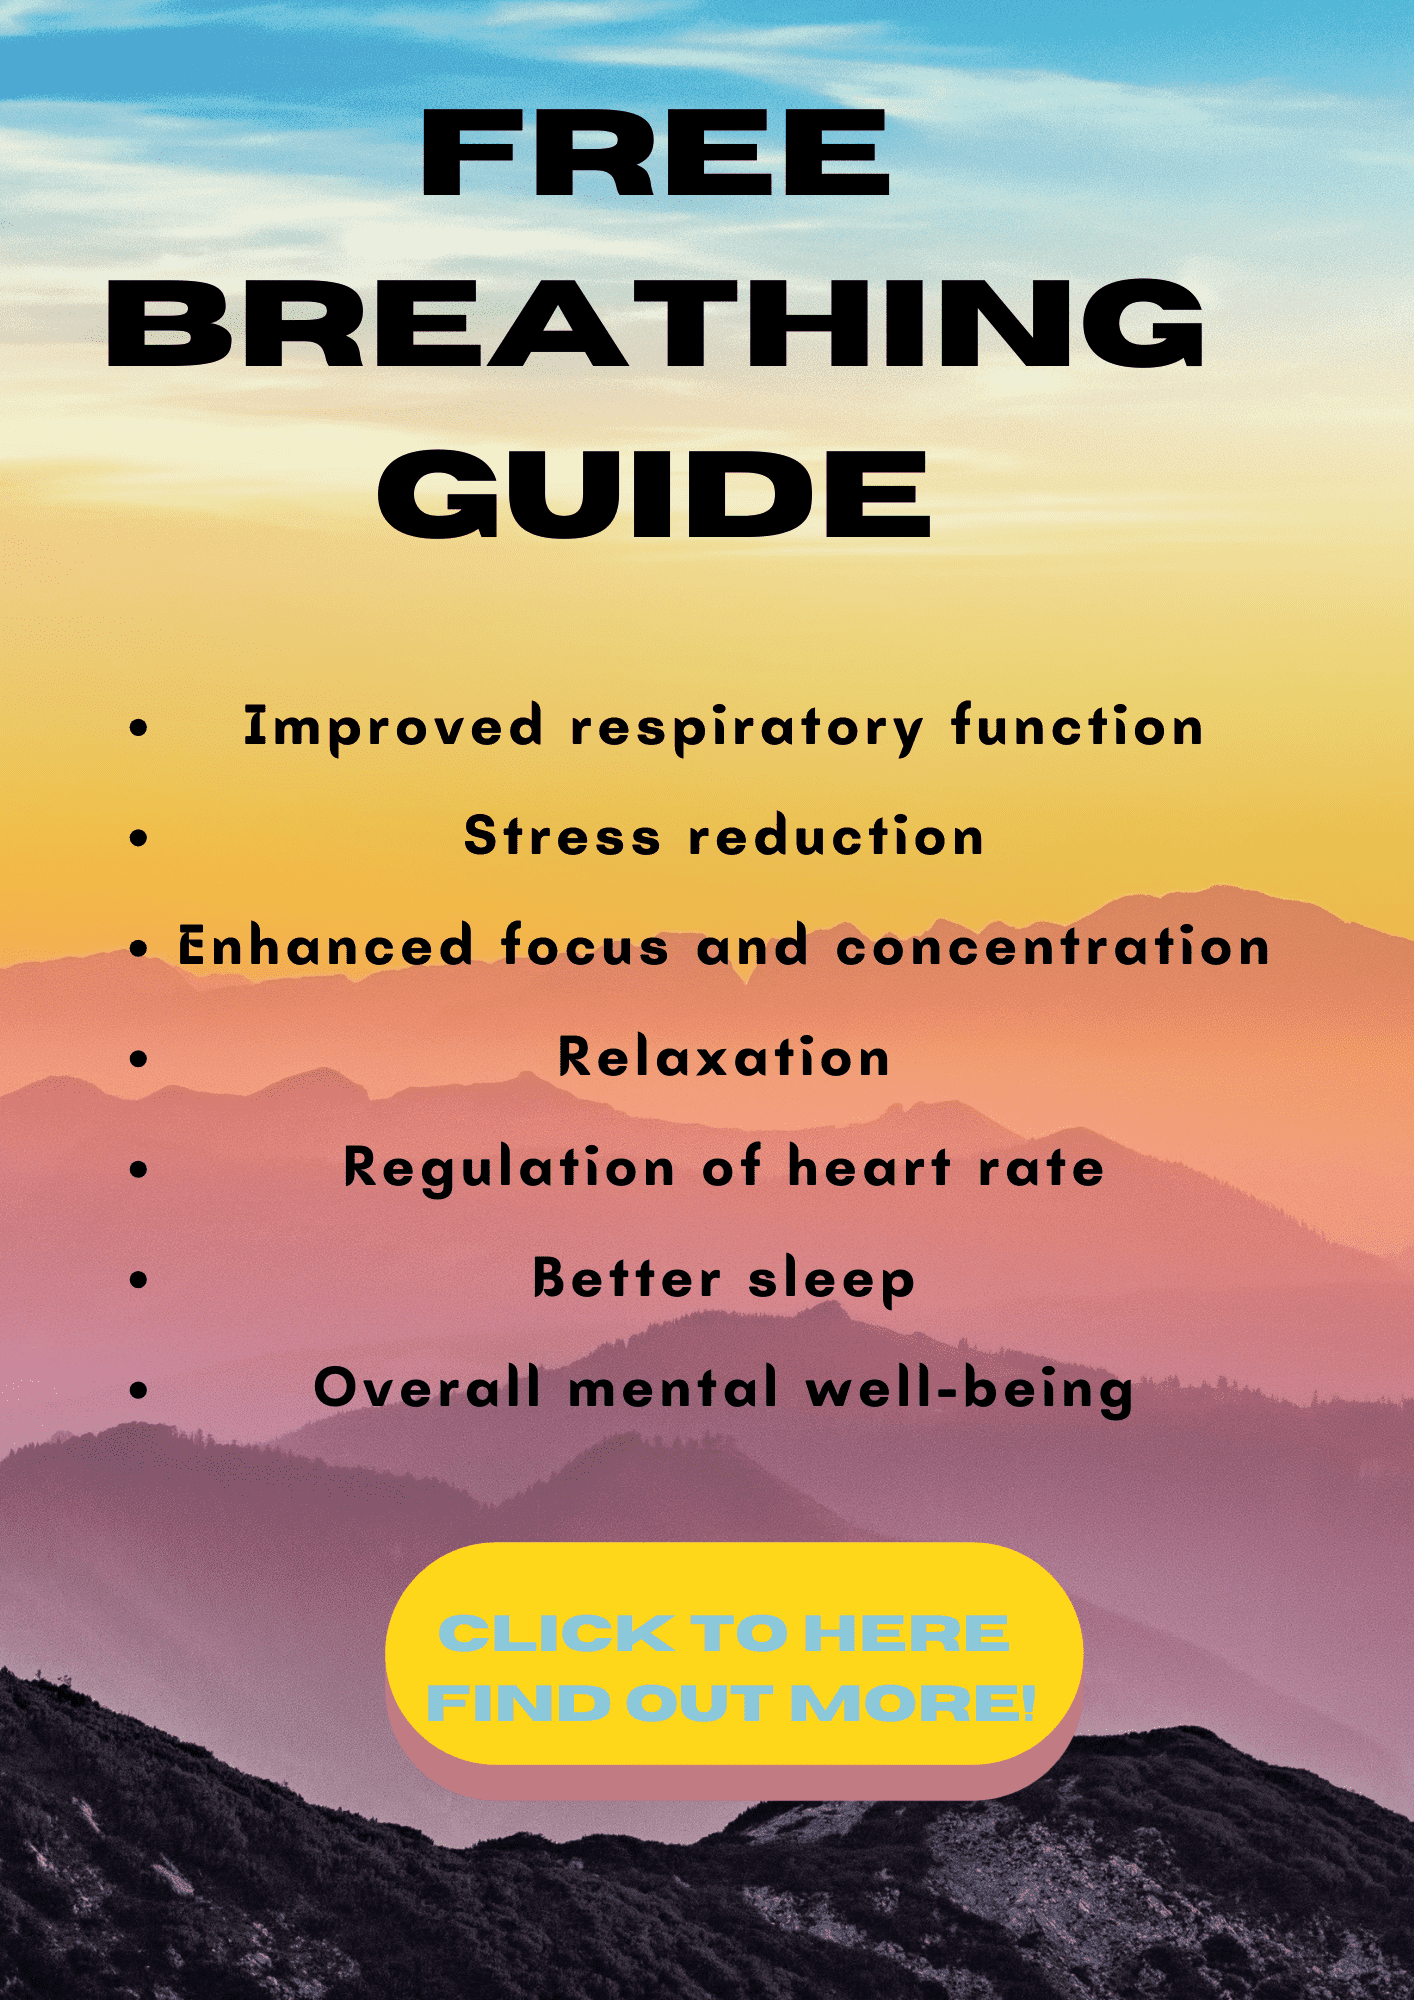 Free Breathing guide